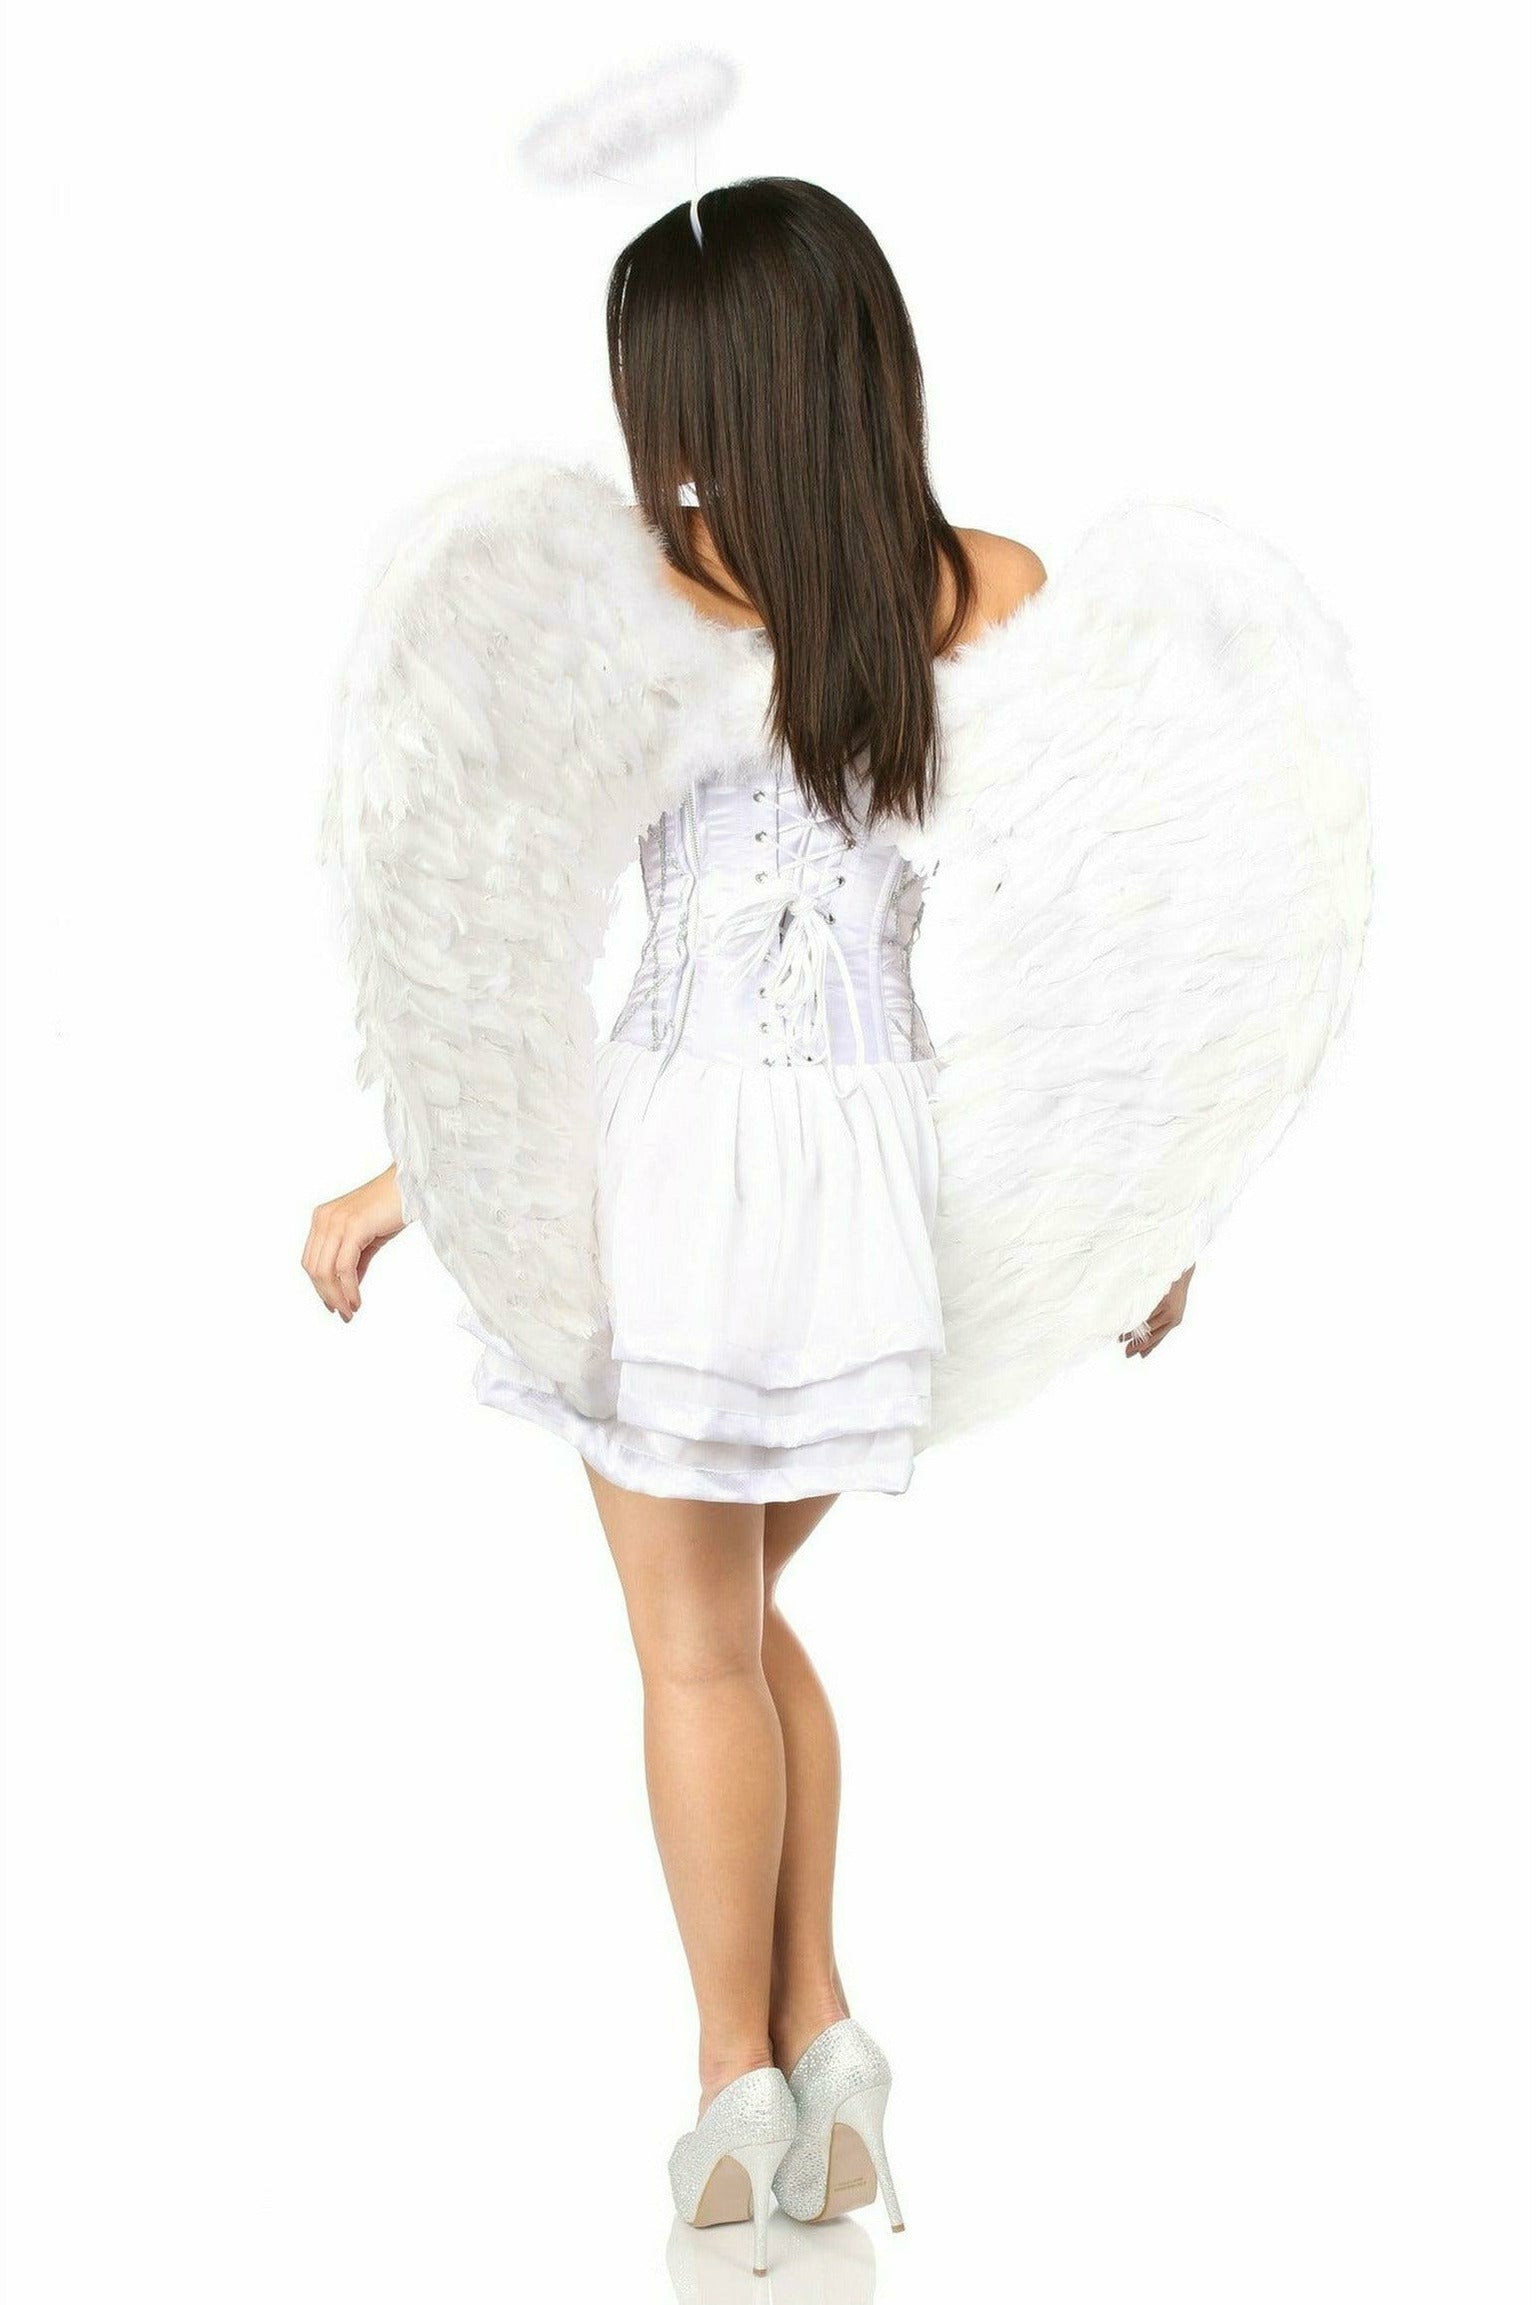 Top Drawer 3 PC Sweet Angel Costume - Daisy Corsets